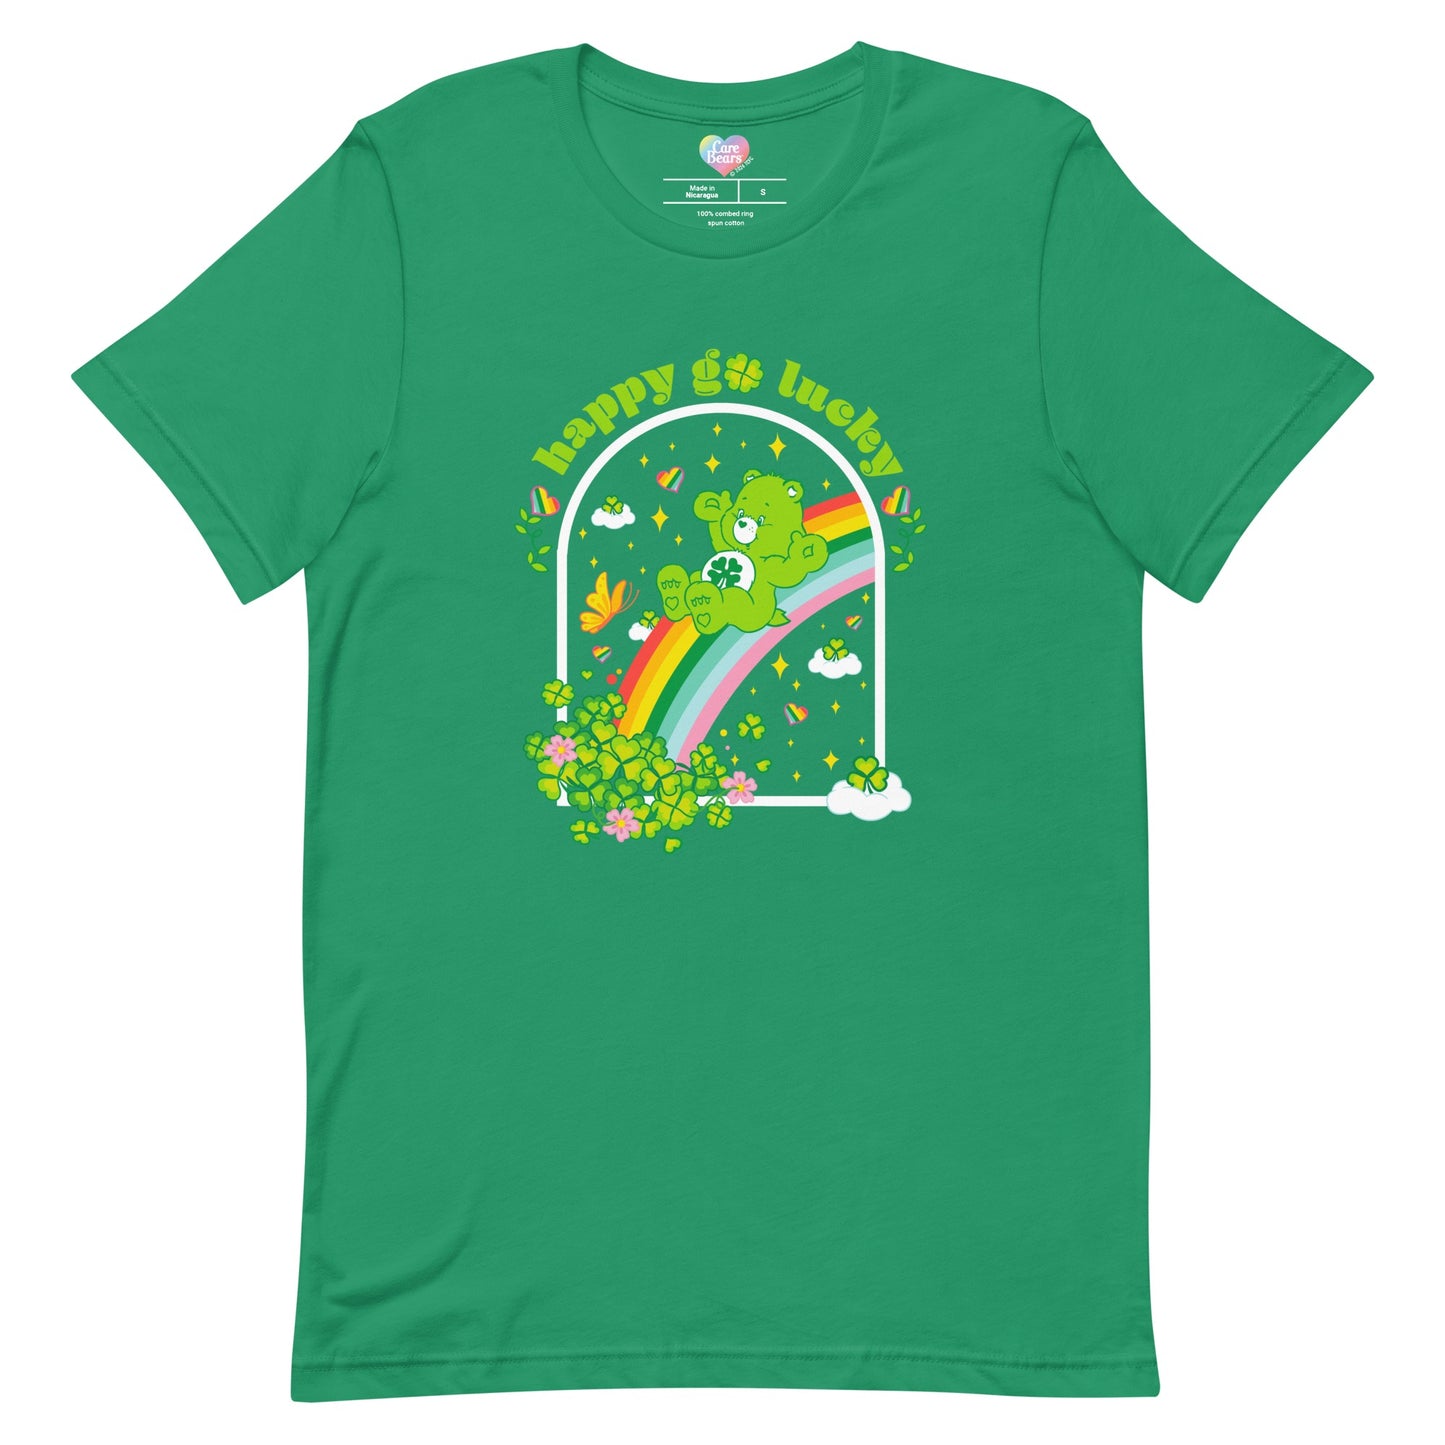 Care Bears Happy Go Luck Adult T-Shirt